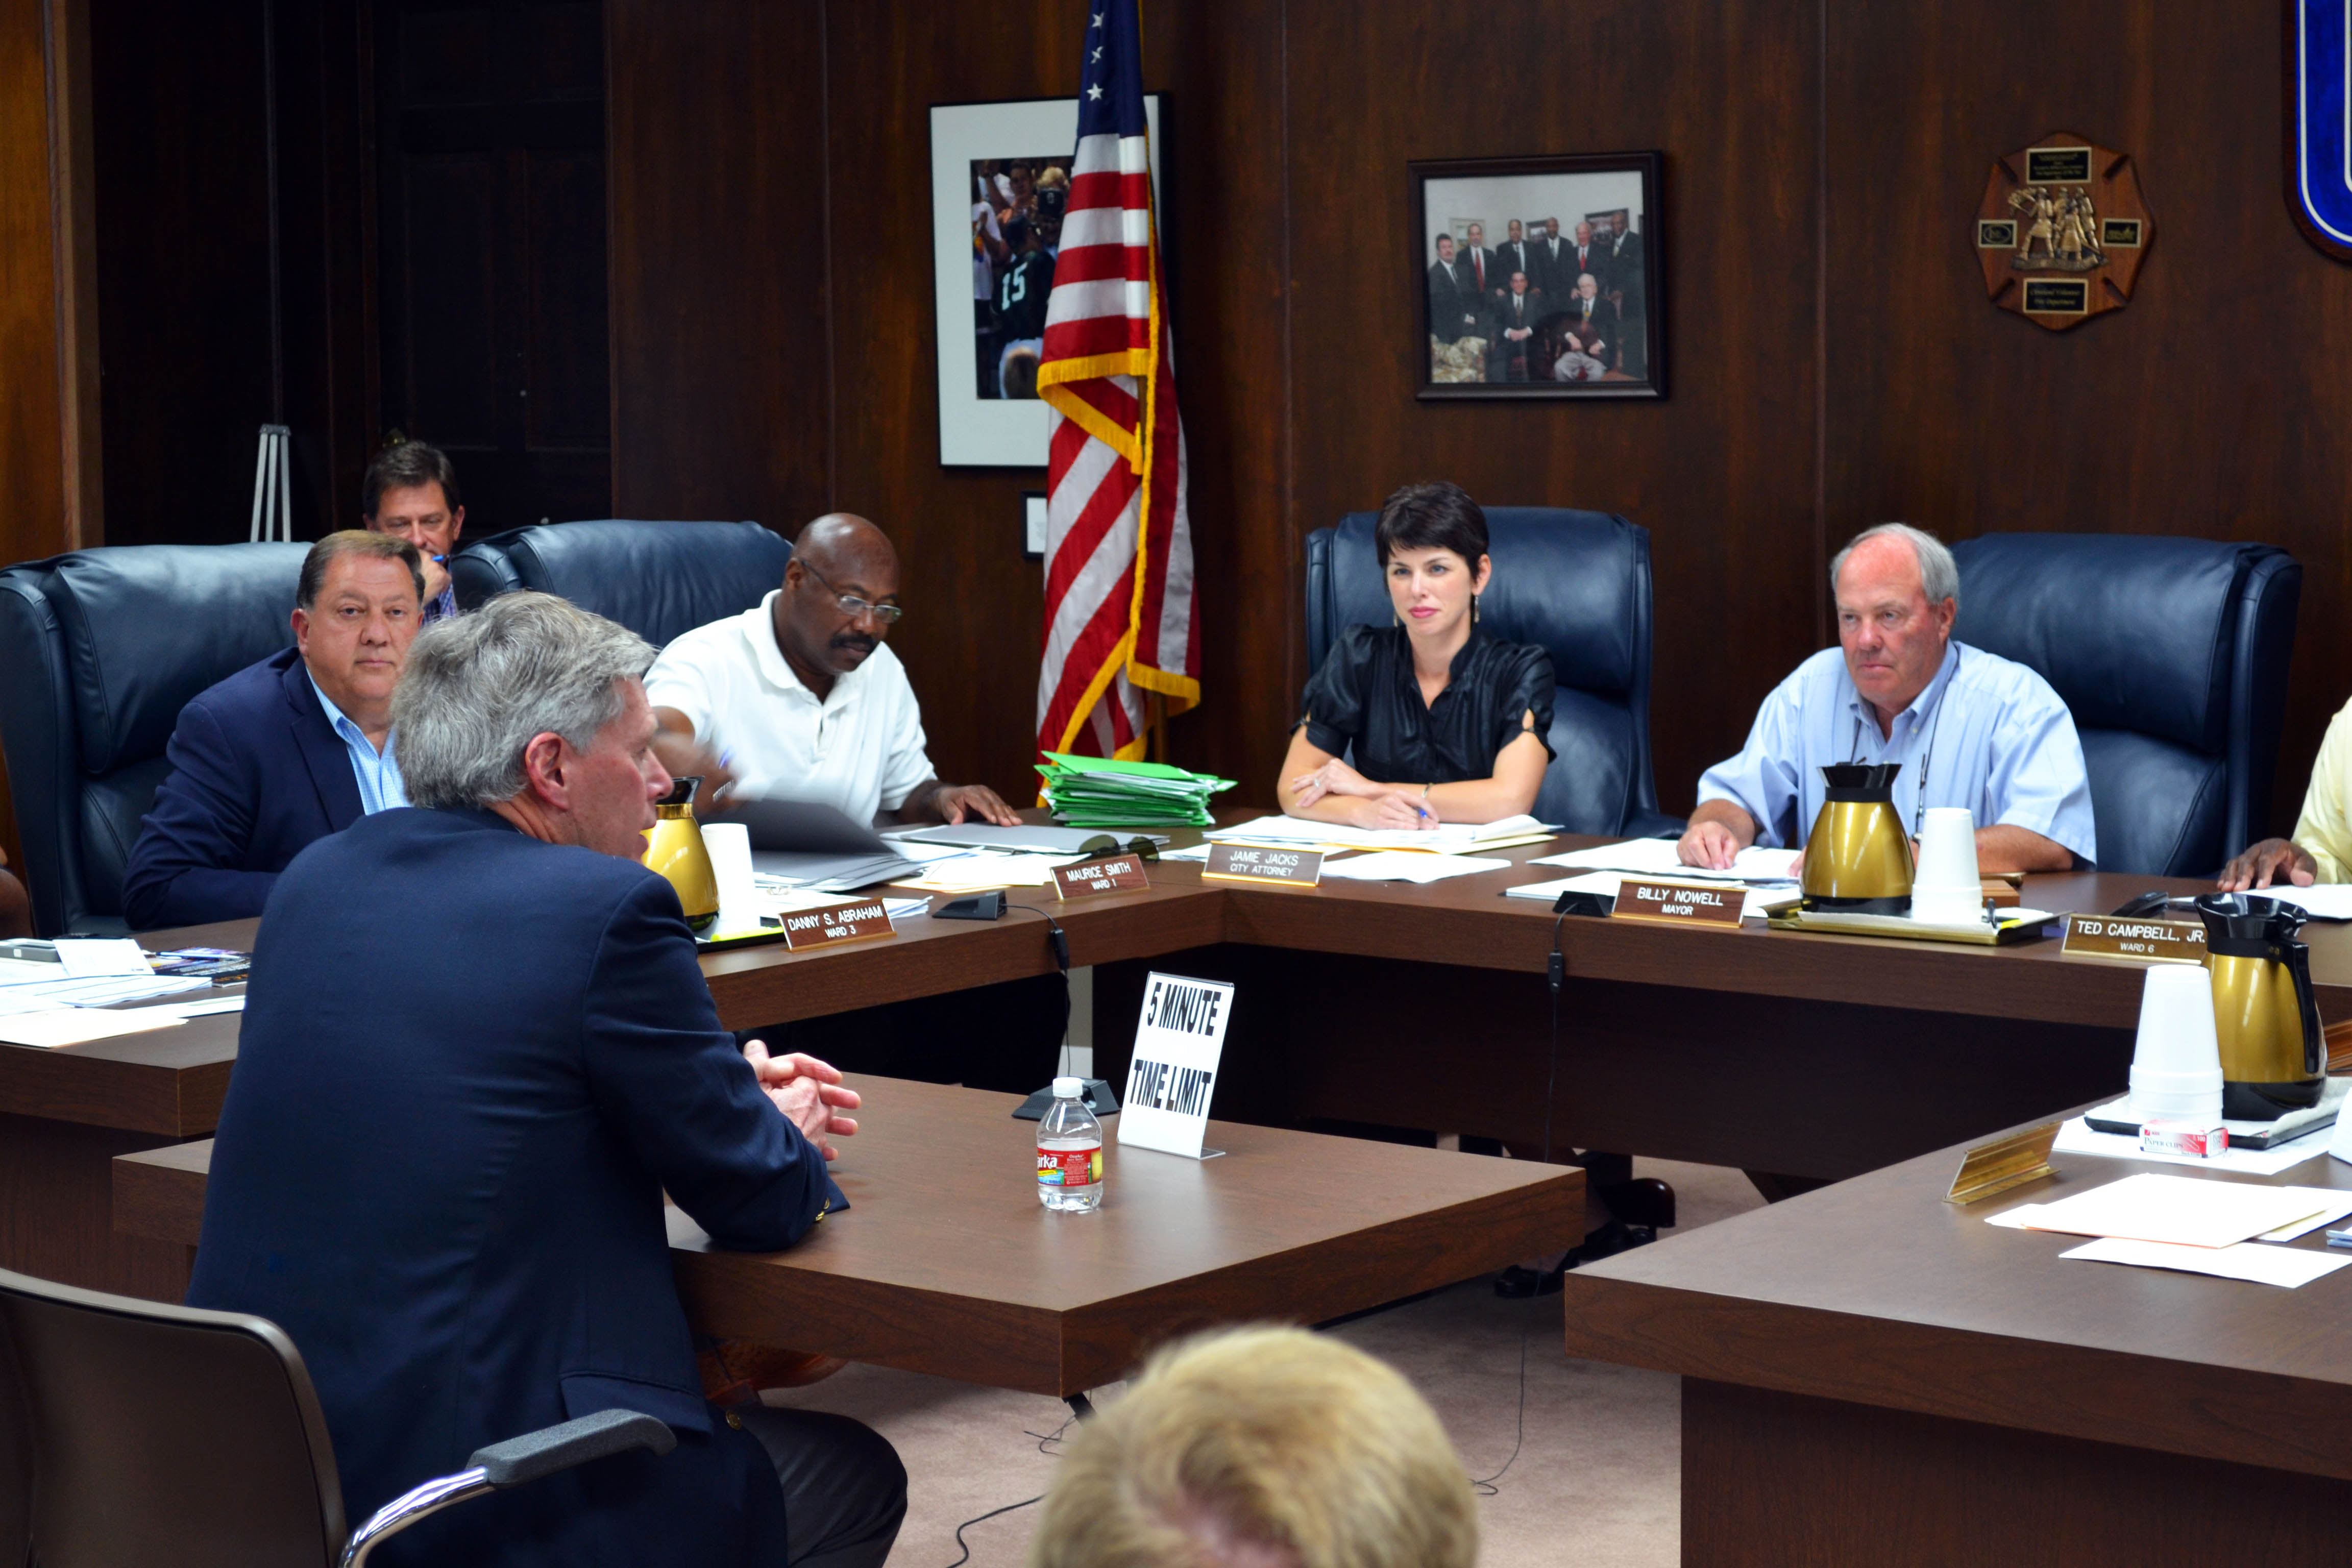 Photo: LaForge meets with mayor Billy Nowell, city attorney Jamie Jacks, and ward representatives to build the campus and community relationship.  